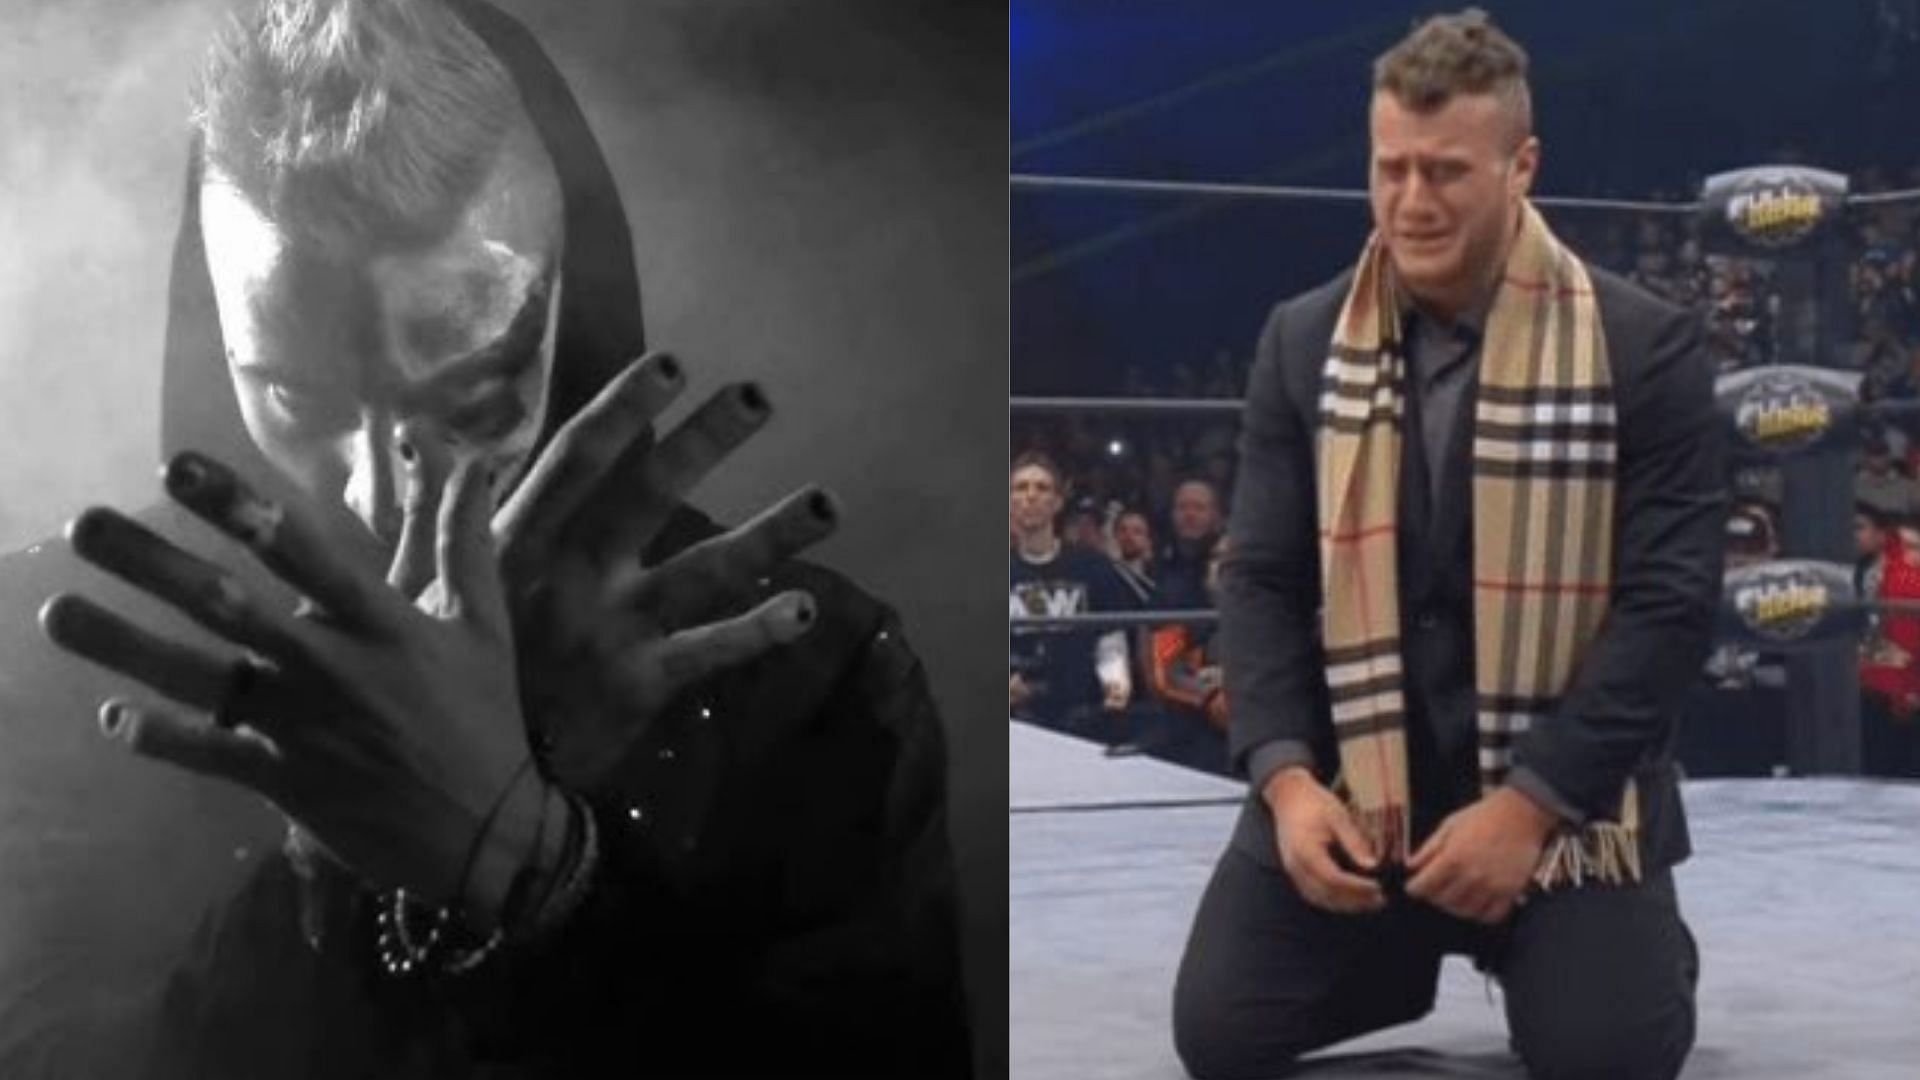 MJF vs Darby Allin at AEW Full Gear 2021 will be a match of the year contender